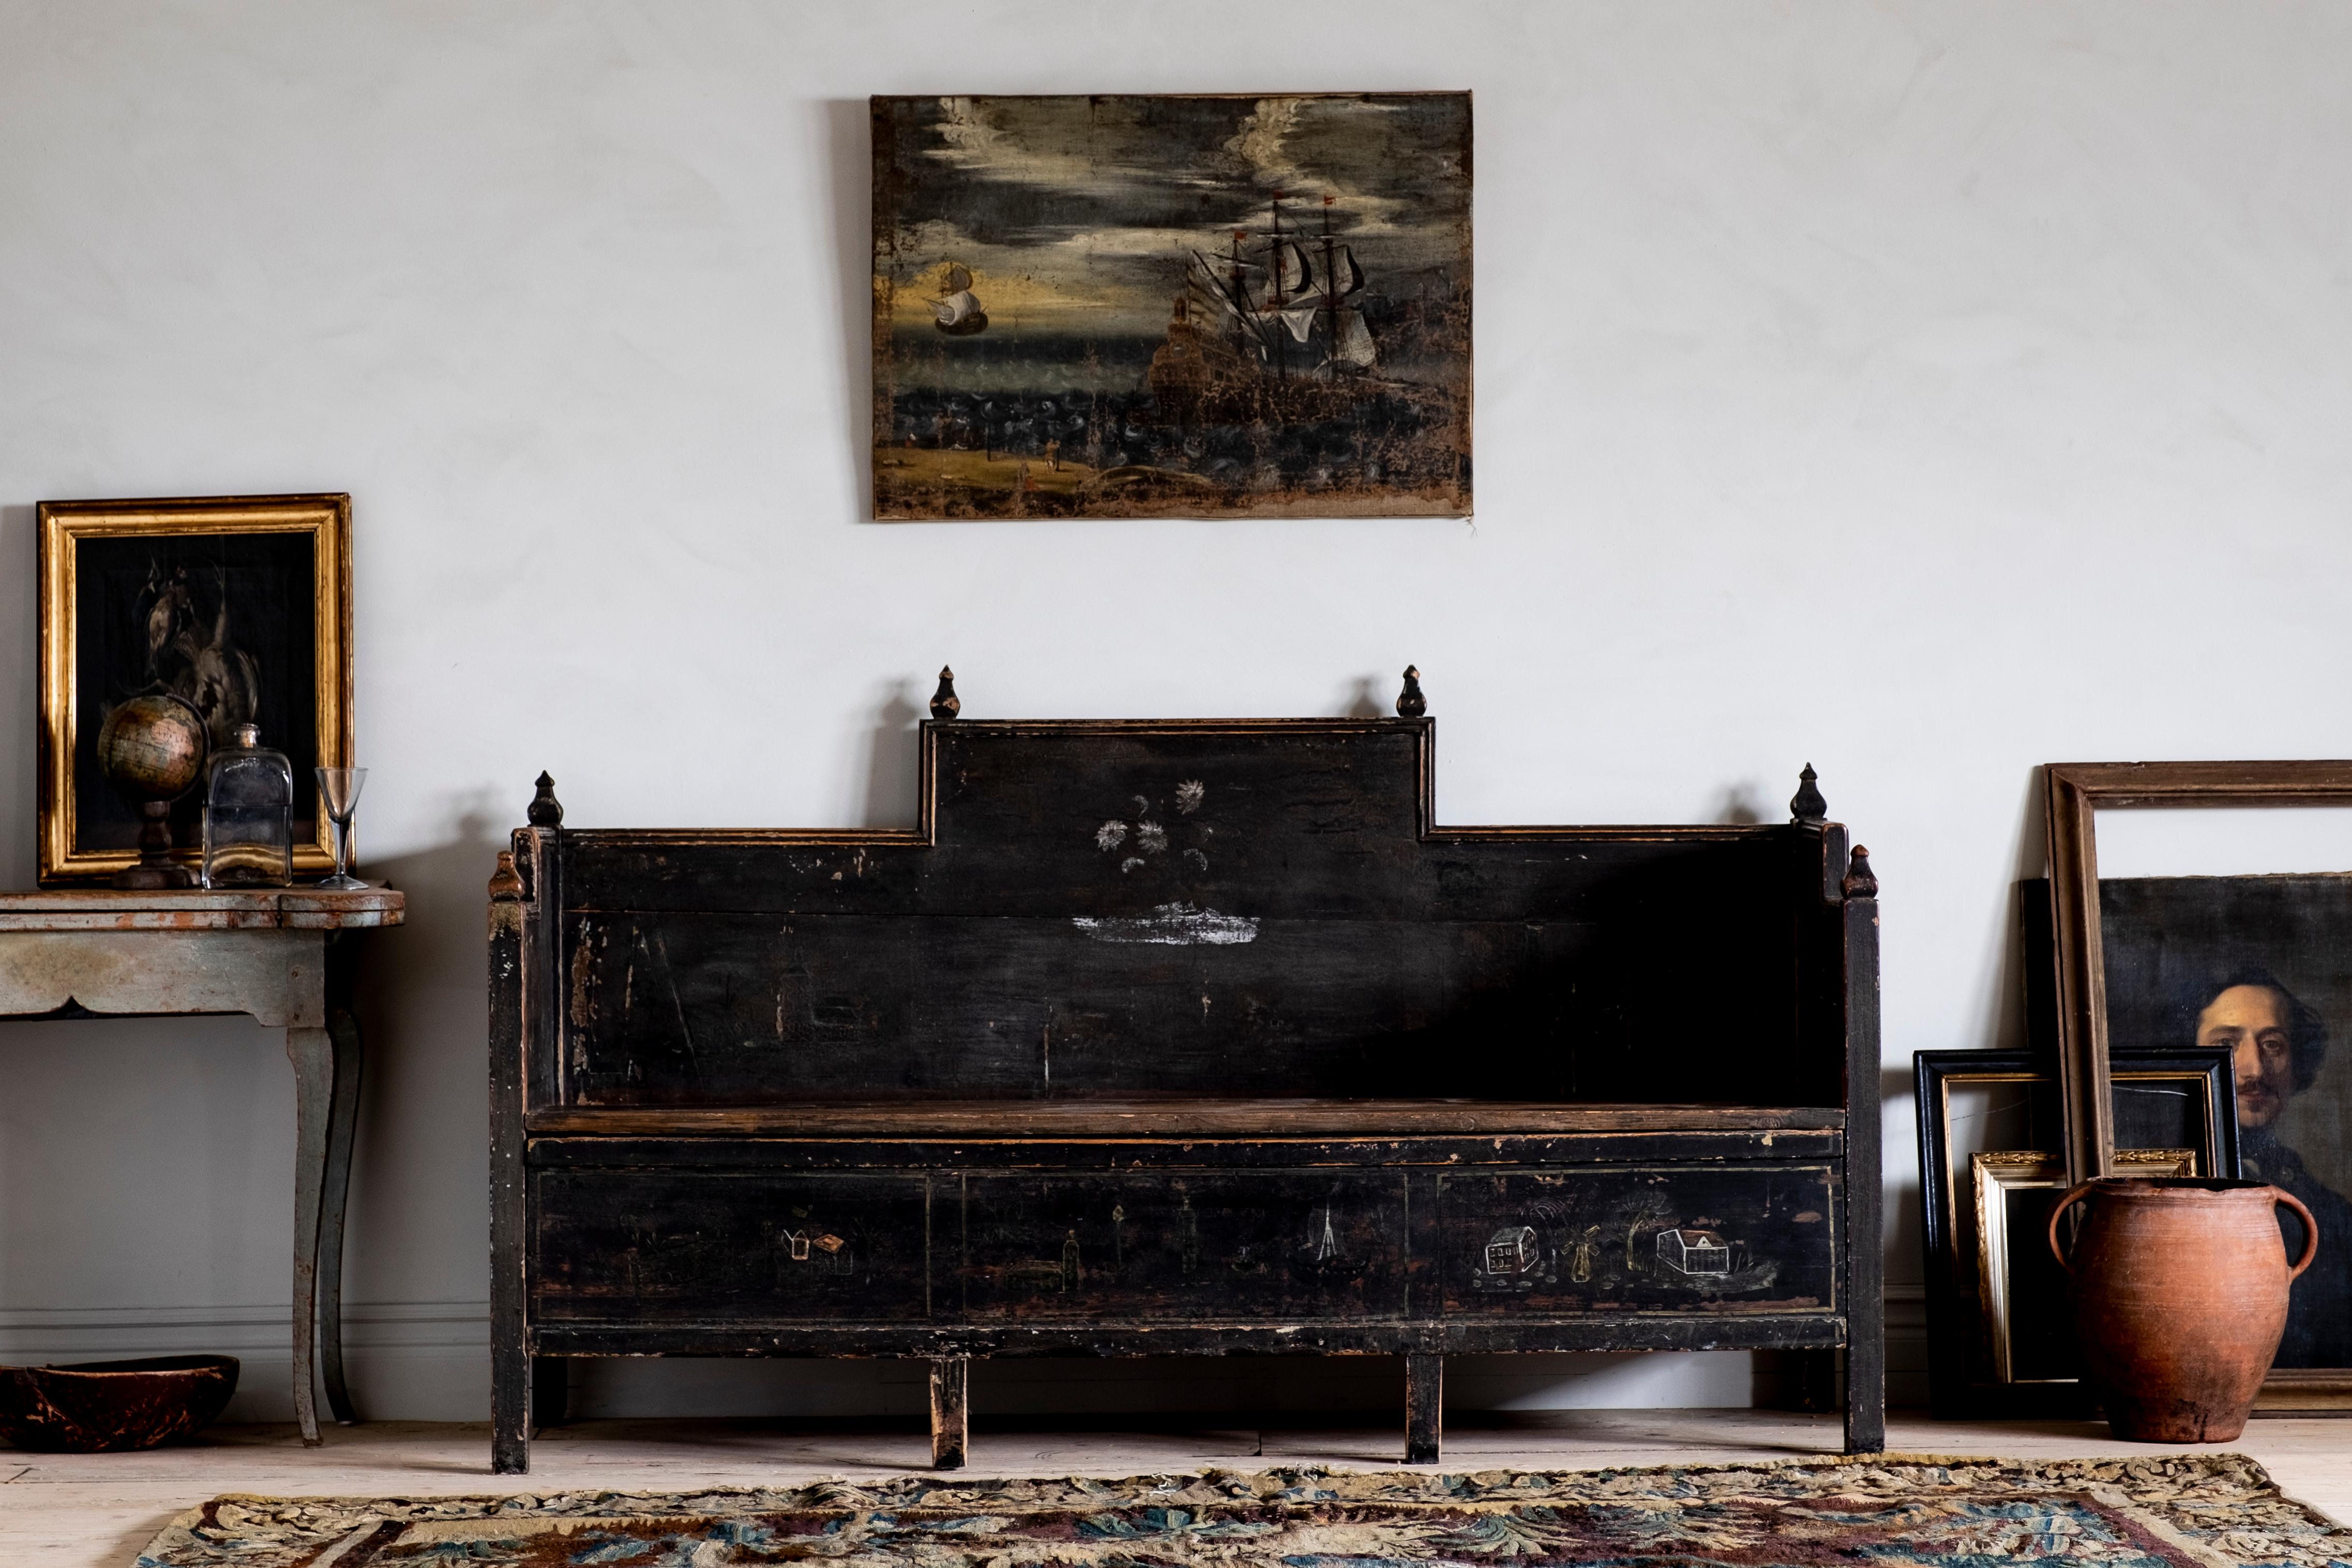 Most unusual 18th century Gustavian folk art sofa in its original black color with a good patinated surface. Wonderful naive paintings on the front and sides and the lid open for storage underneath, circa 1790 Sweden. 

The condition is good with